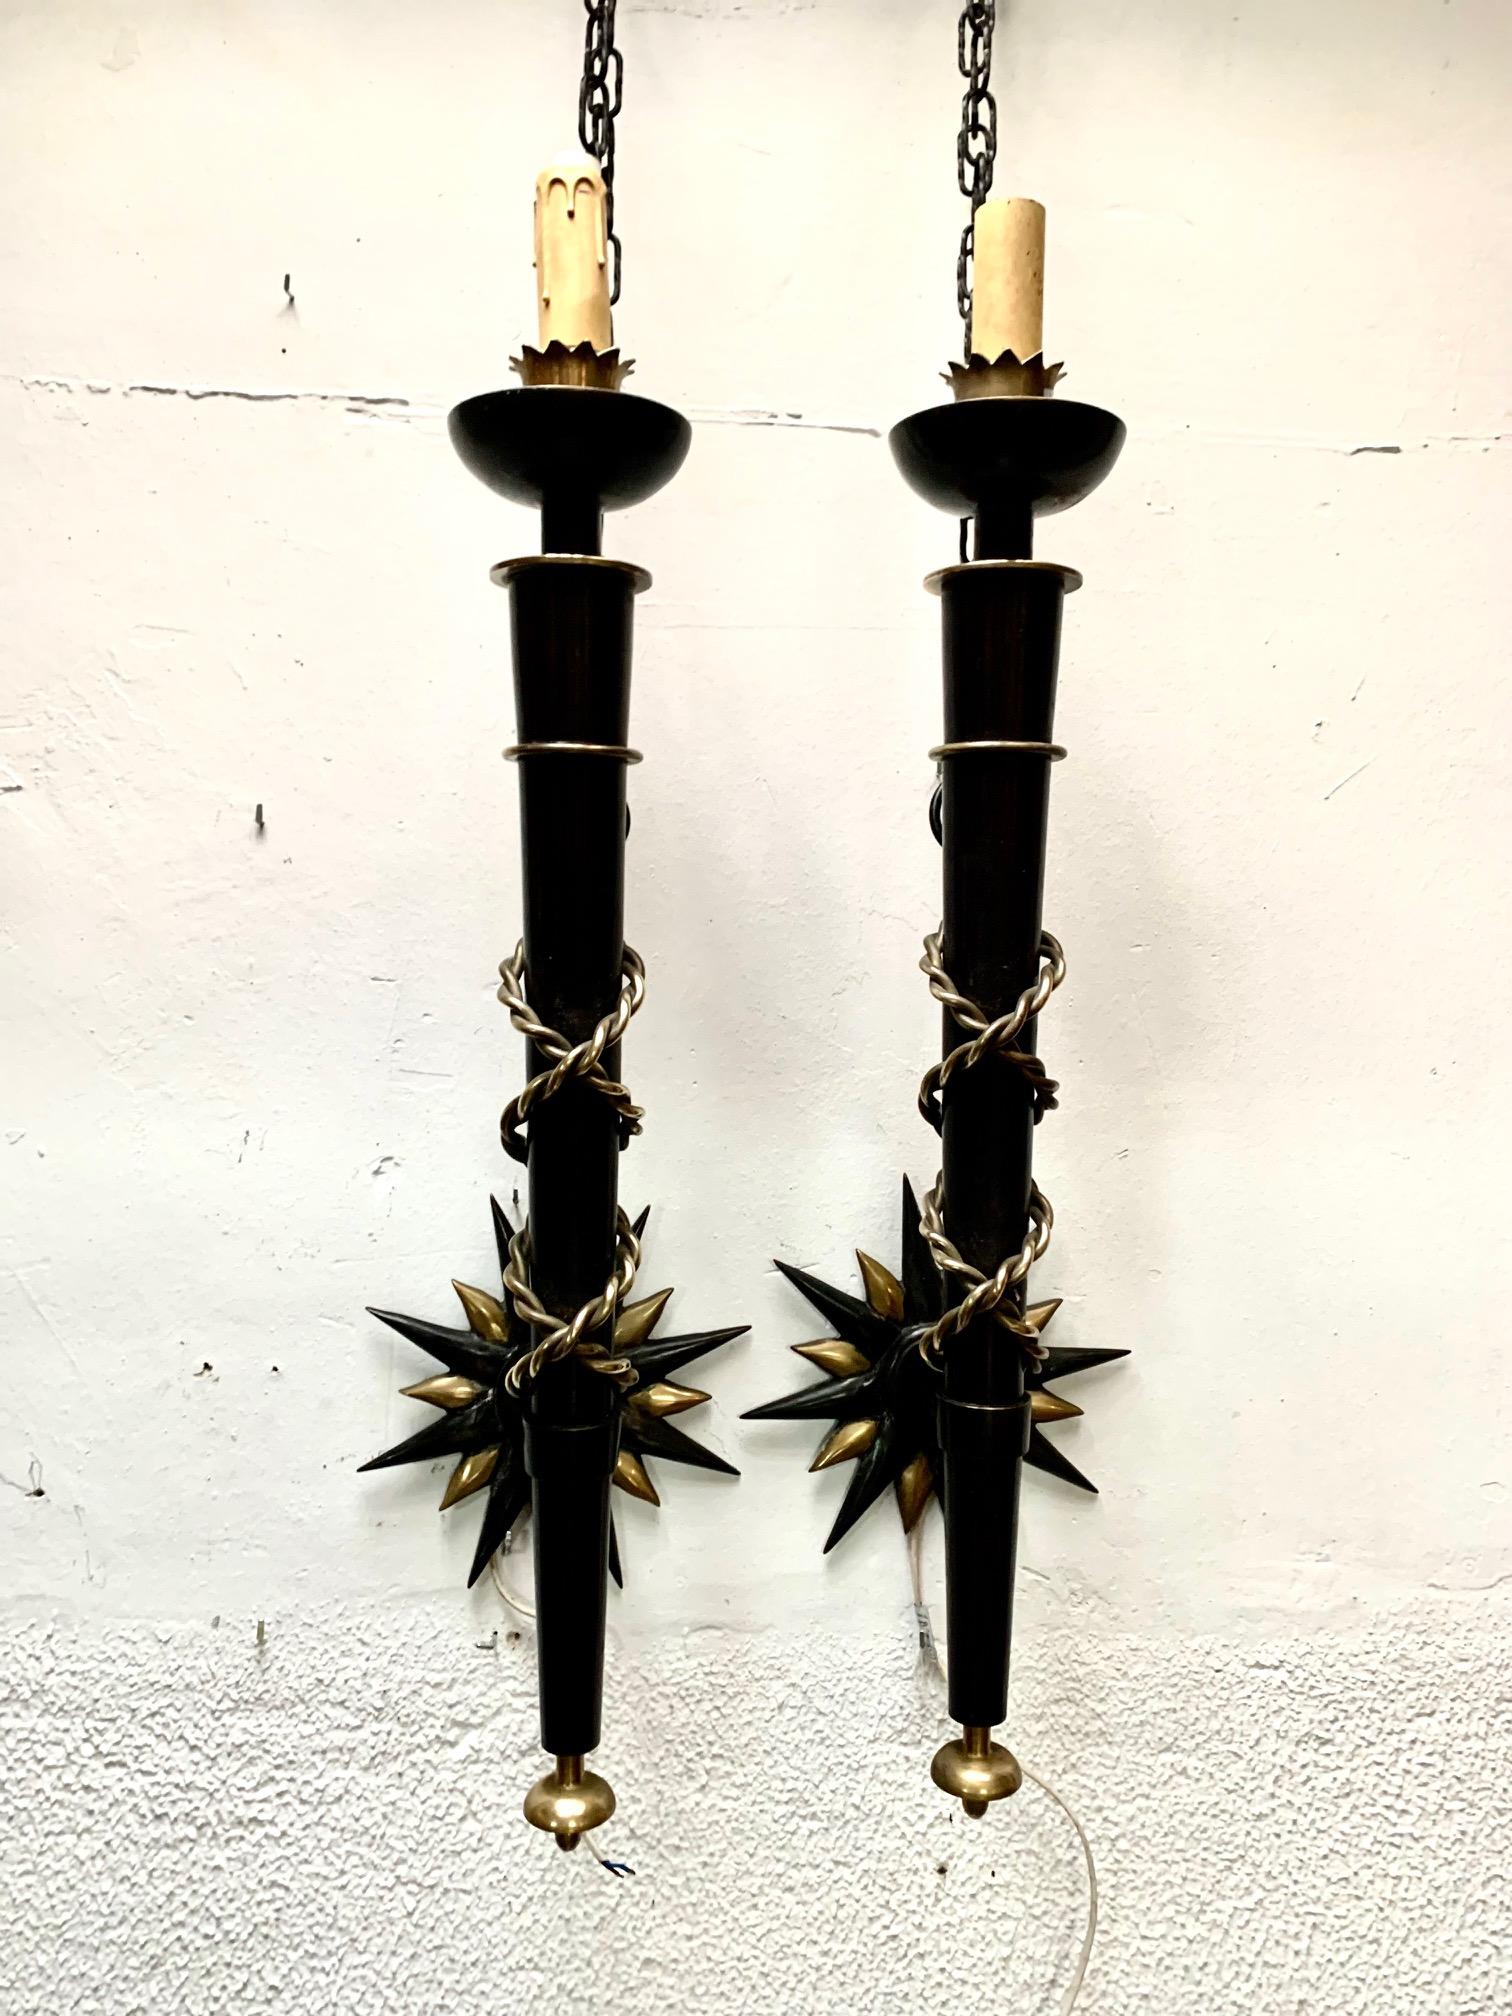 Pair Wrought Iron and Brass Toorchere Wall Sconces 1950 Gilbert Poillerat Style For Sale 8